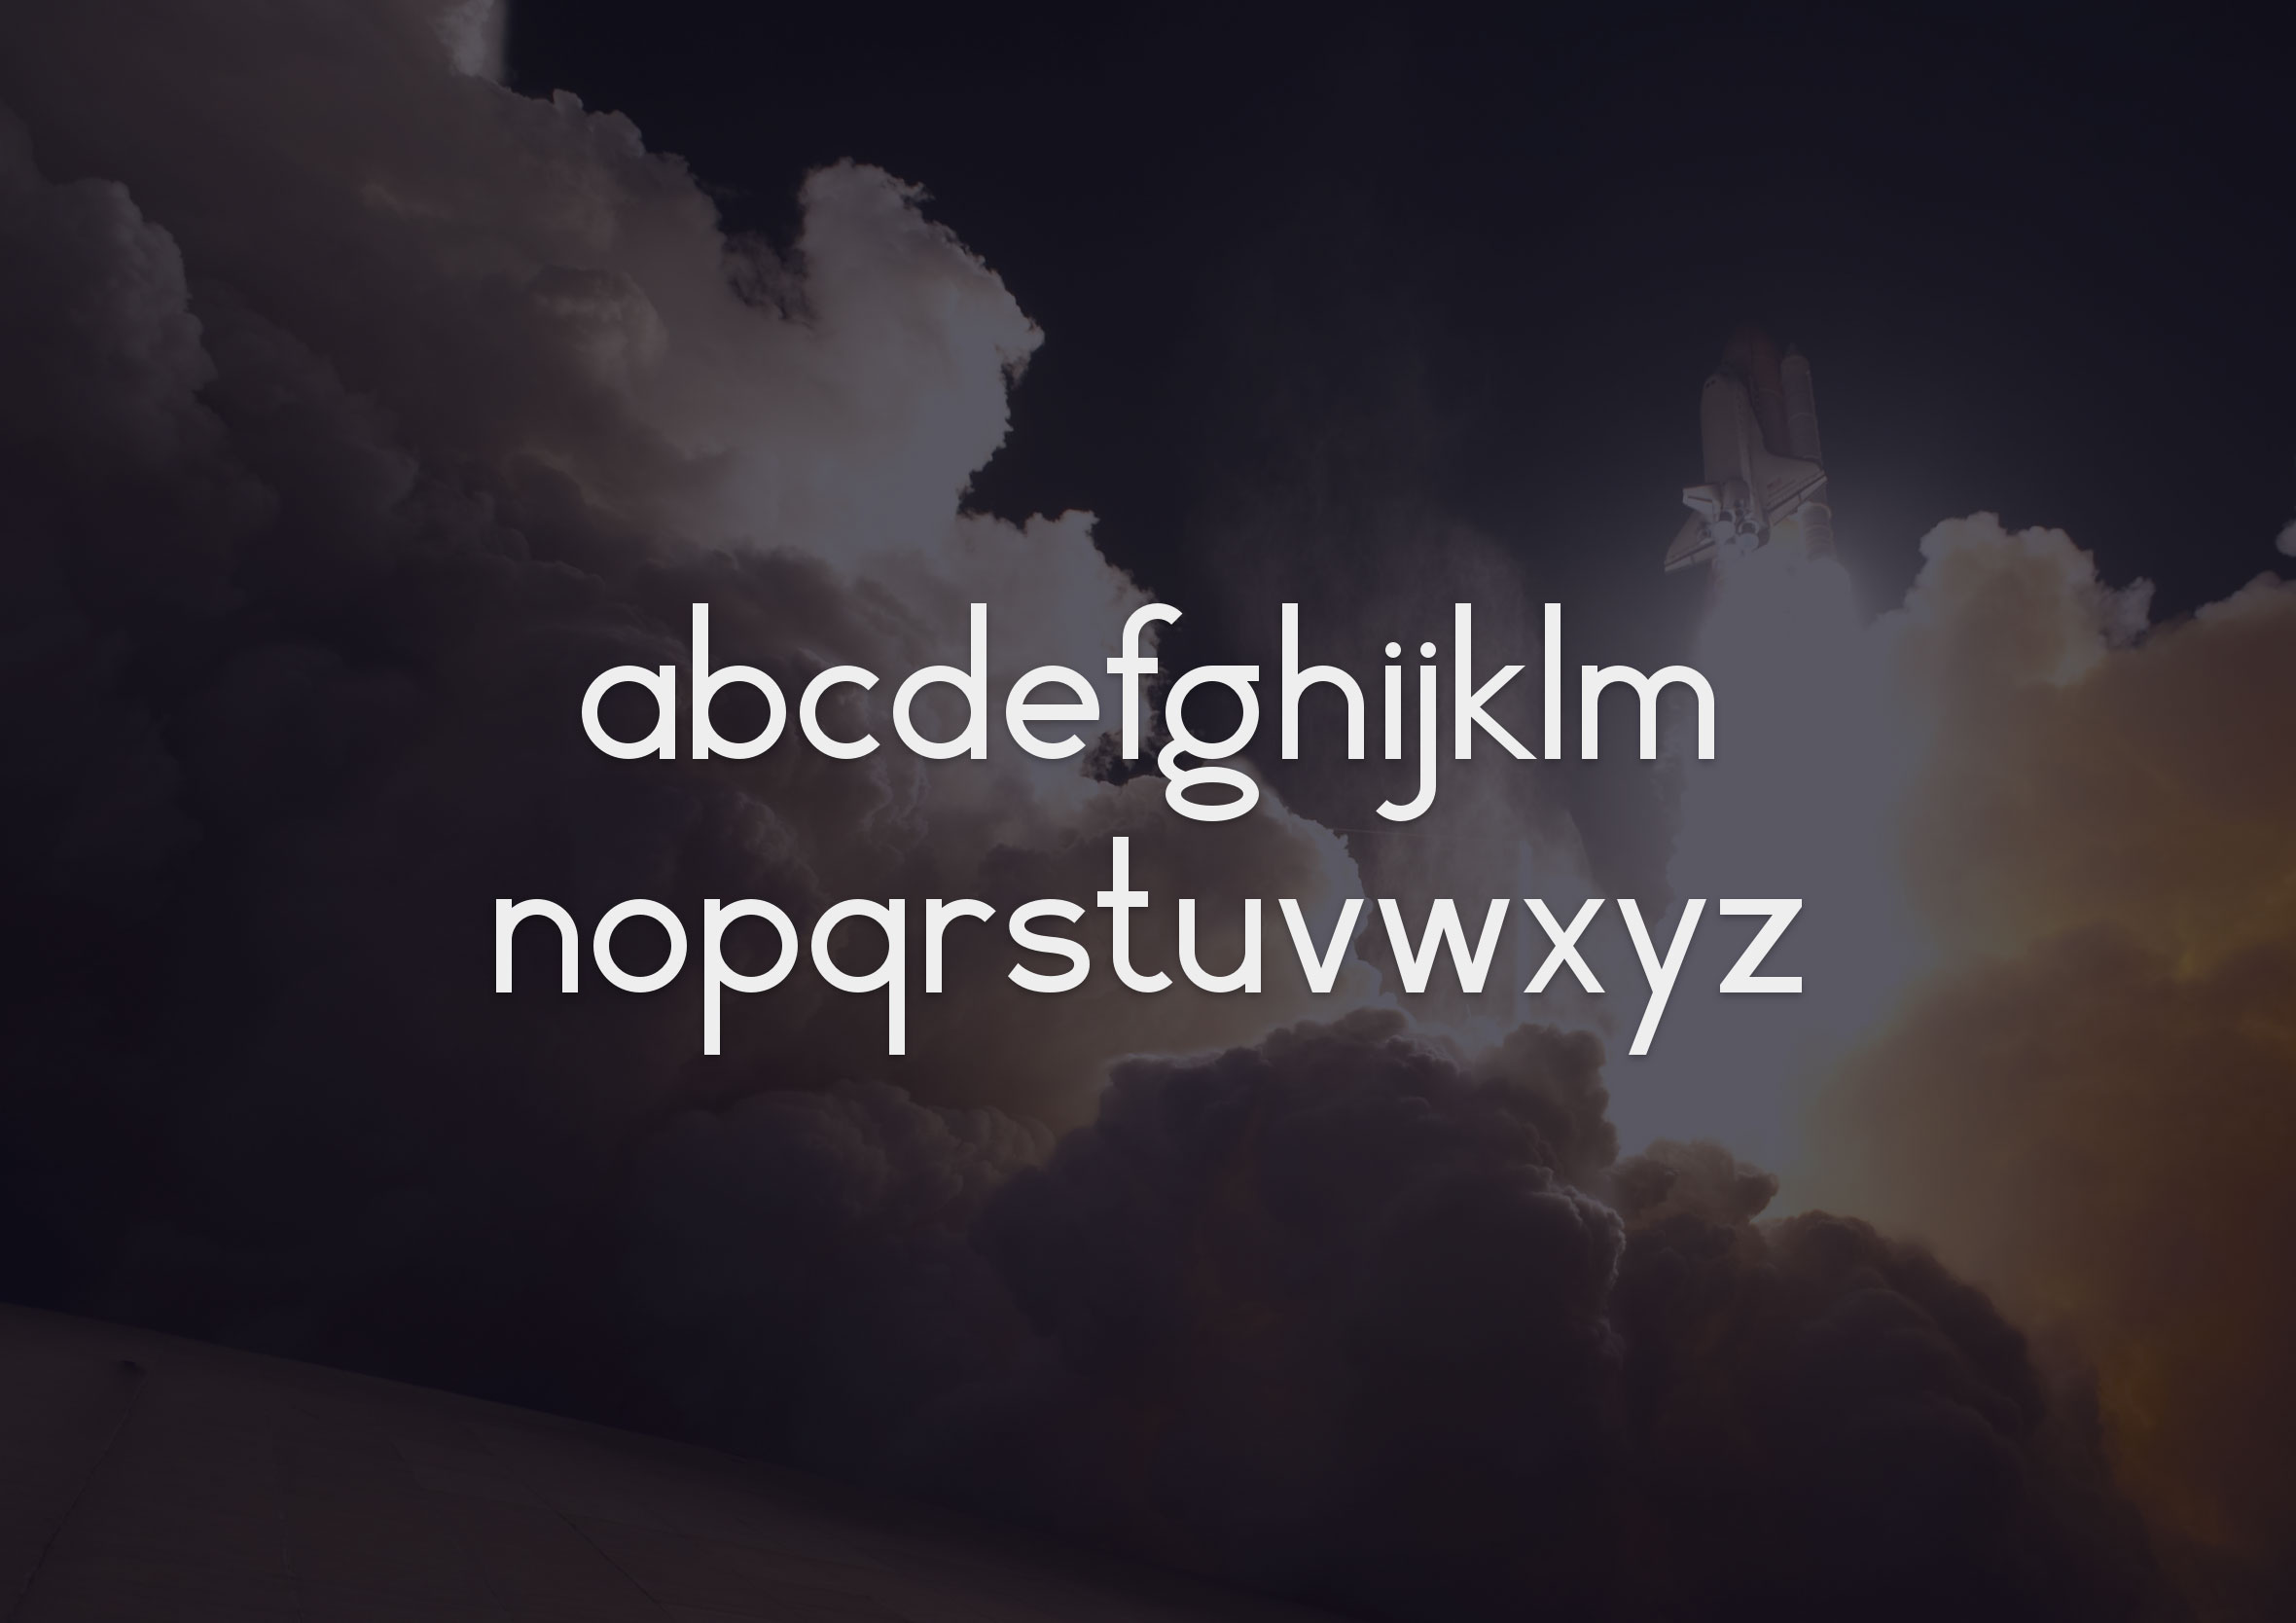 rich-mcnabb-free-vector-font-featured